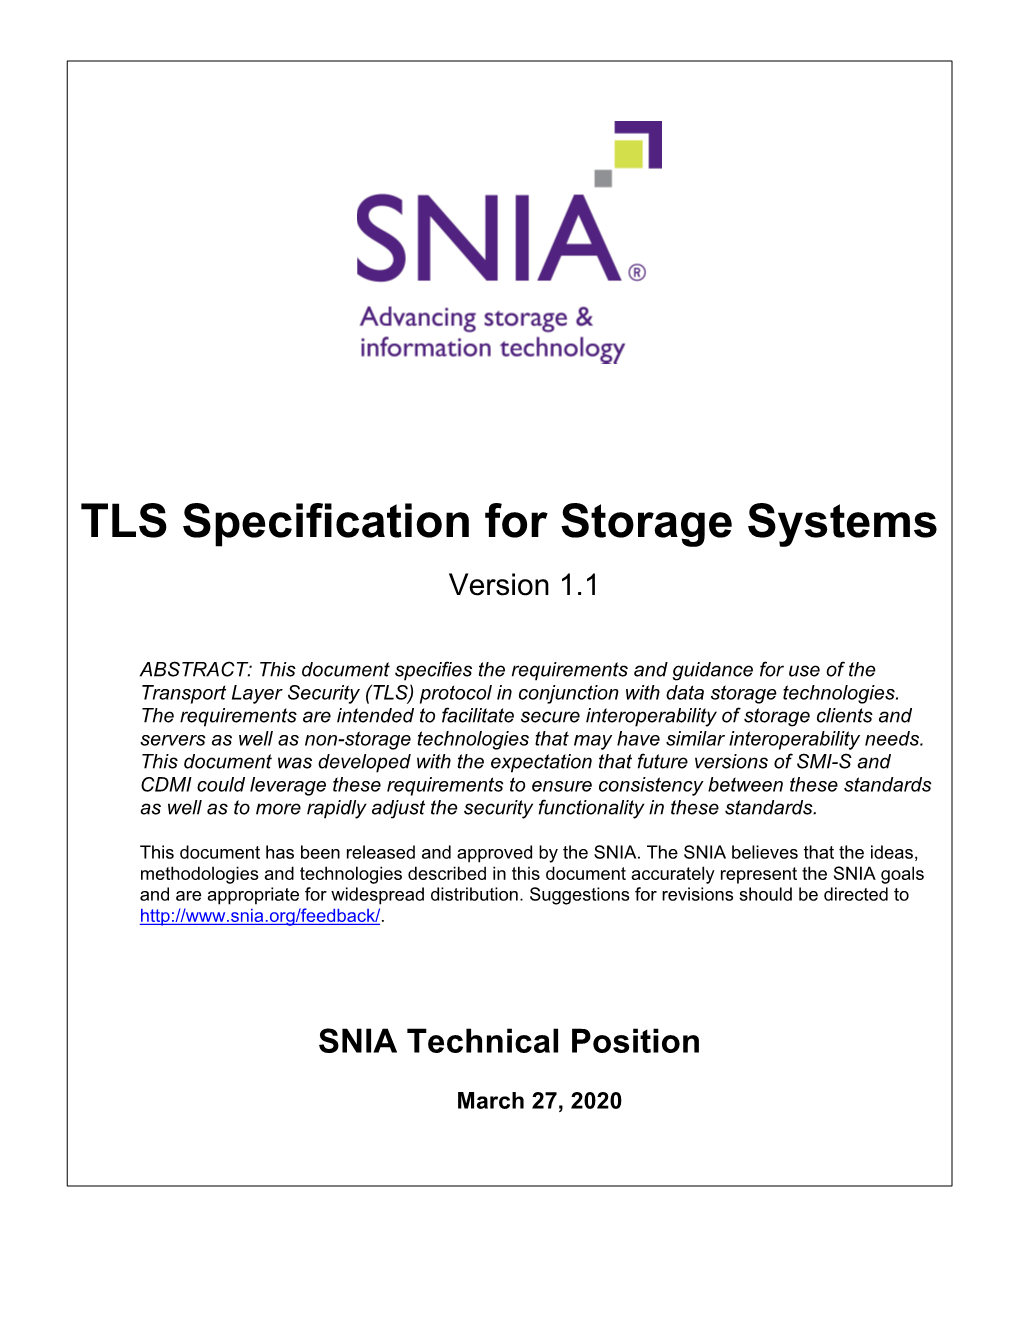 TLS Specification for Storage Systems Version 1.1